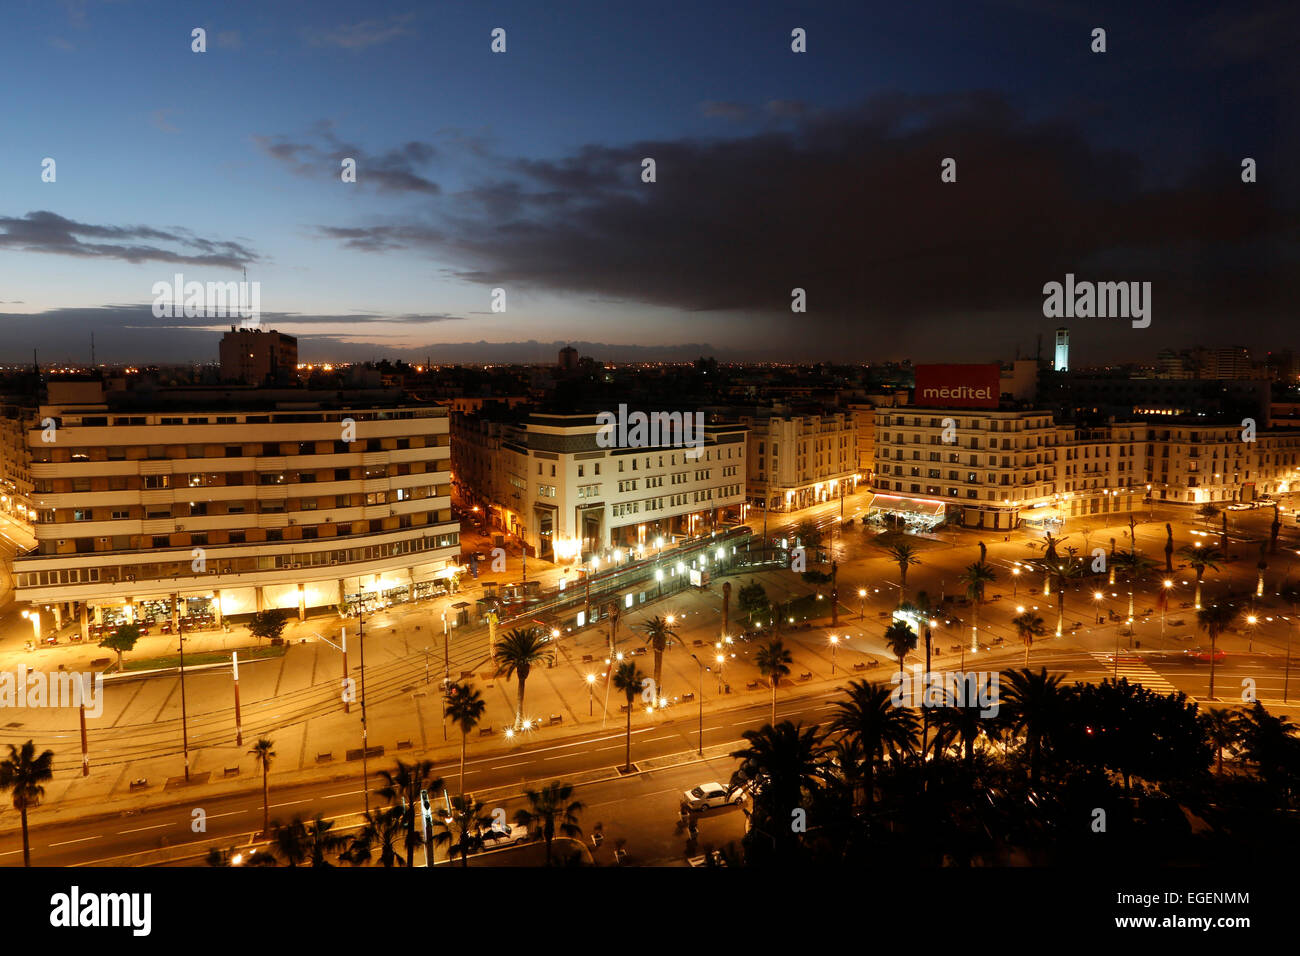 Evening atmosphere at Place des Nations Unies, Casablanca, Morocco Stock Photo